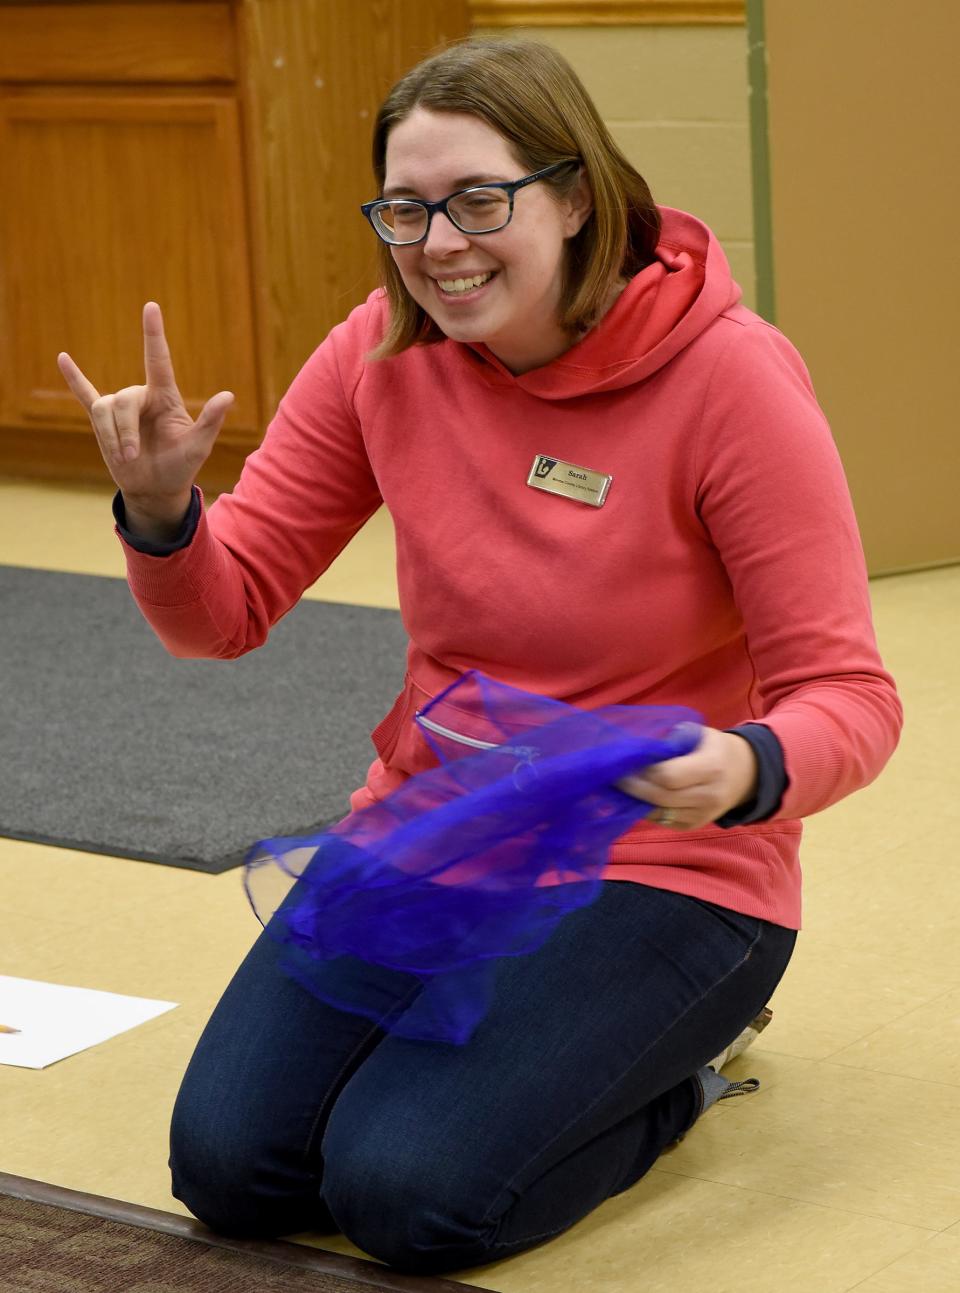 Sarah Seegert, the youth services technician at Summerfield-Petersburg Branch Library, says "I love you" in sign language during a song at the baby sign language program.